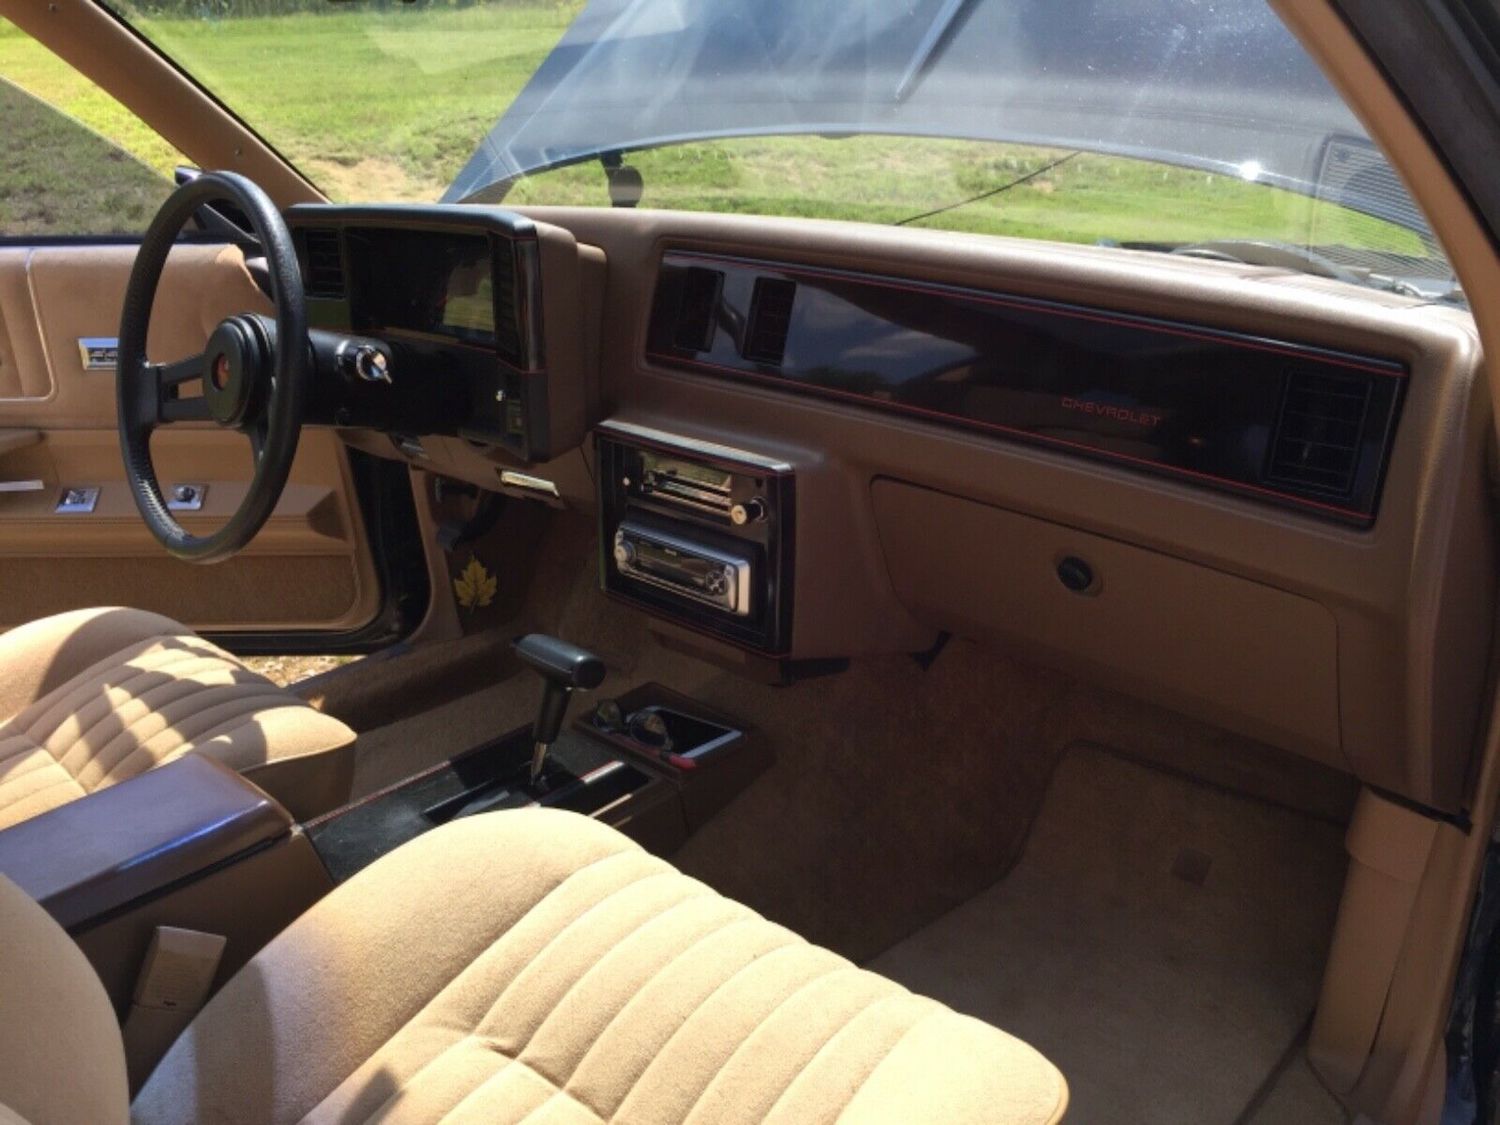 This 1988 Chevrolet Monte Carlo Ss Is As Clean As They Come